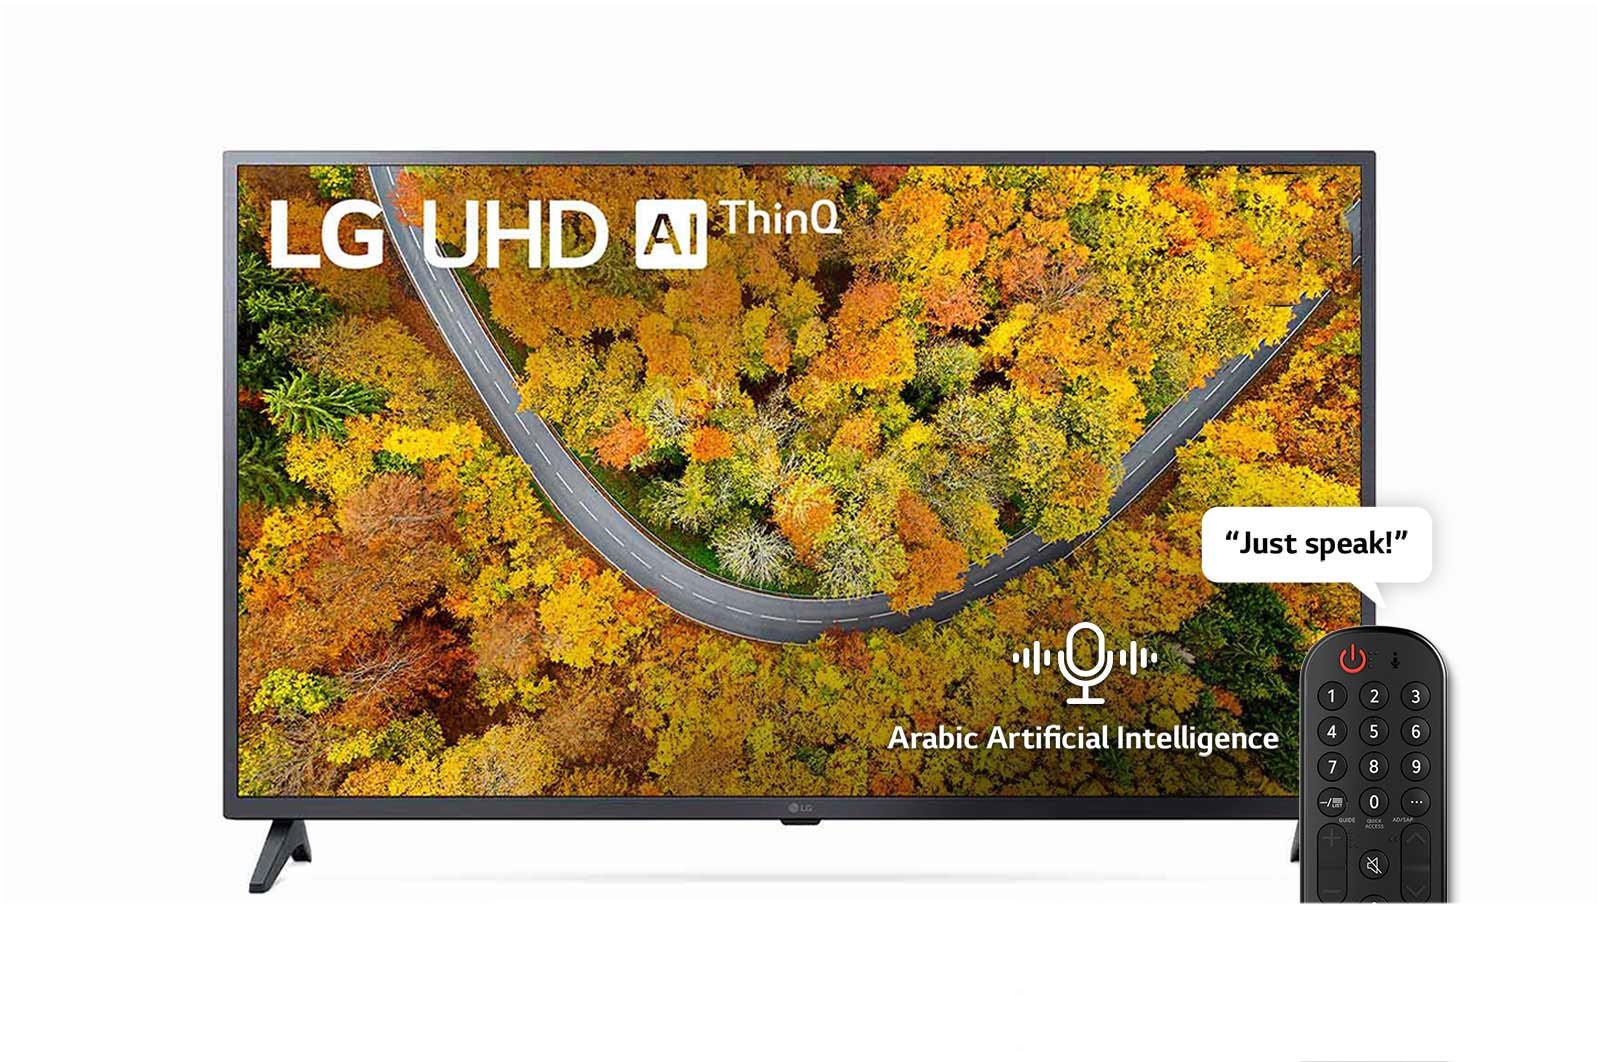 LG UHD TV (43") With LG's Cinematic 4K Active HDR Screen Design